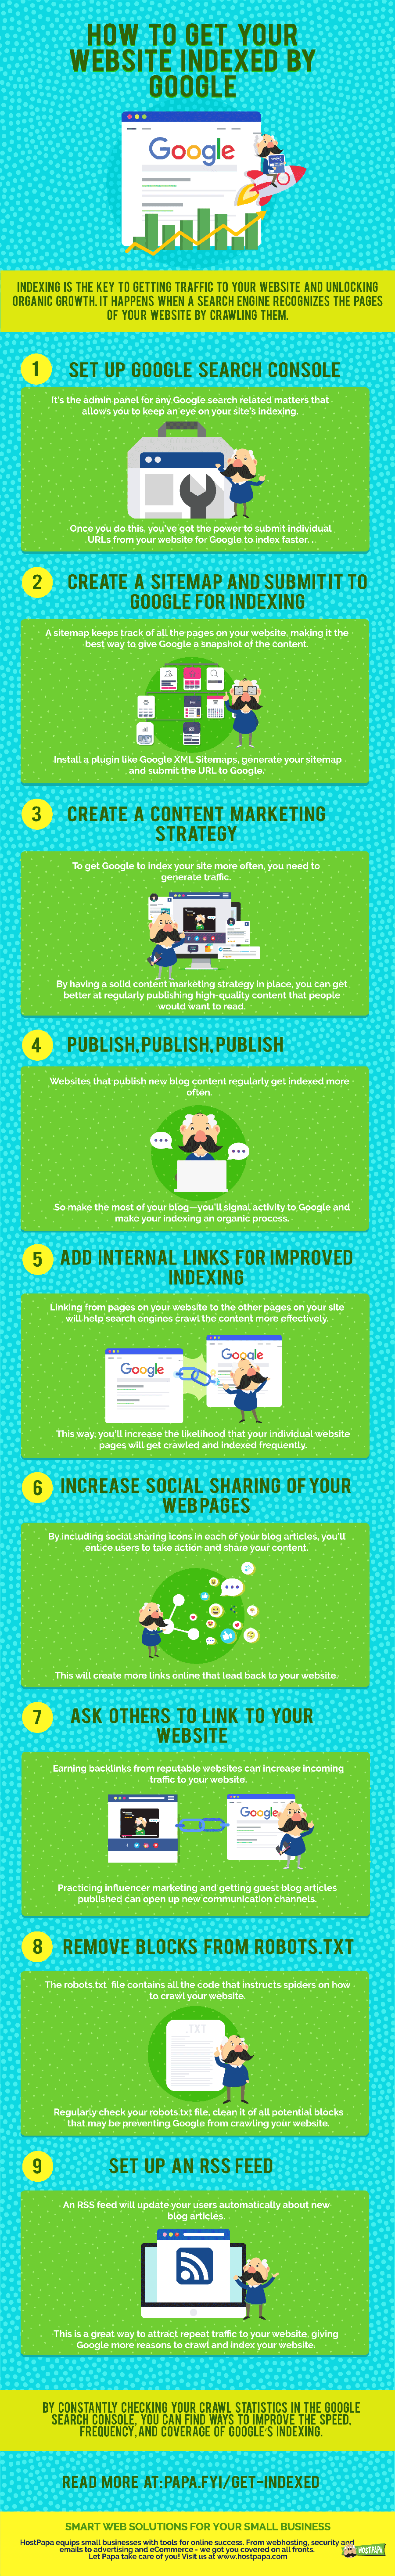 Get Your Website Indexed by Google